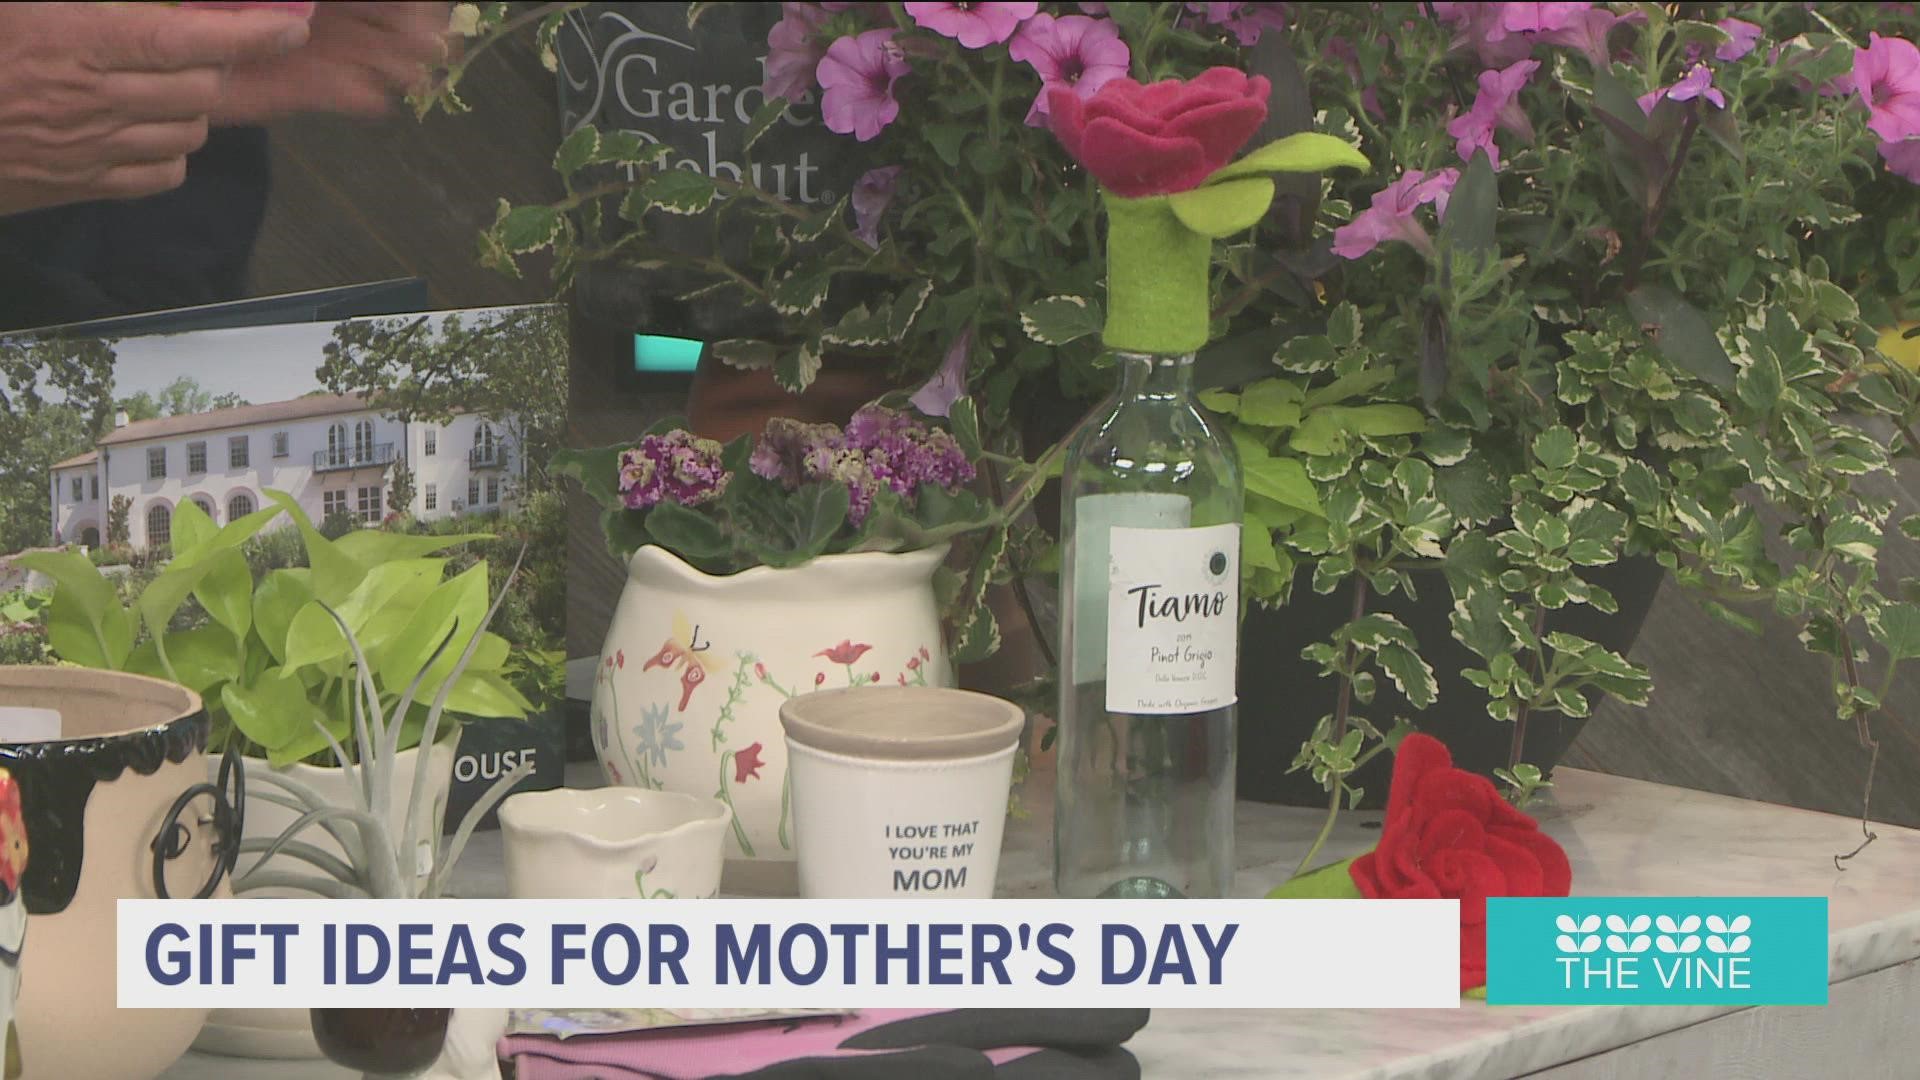 Chris H. Olsen is here and we are talking about all the moms out there and has some gift ideas.